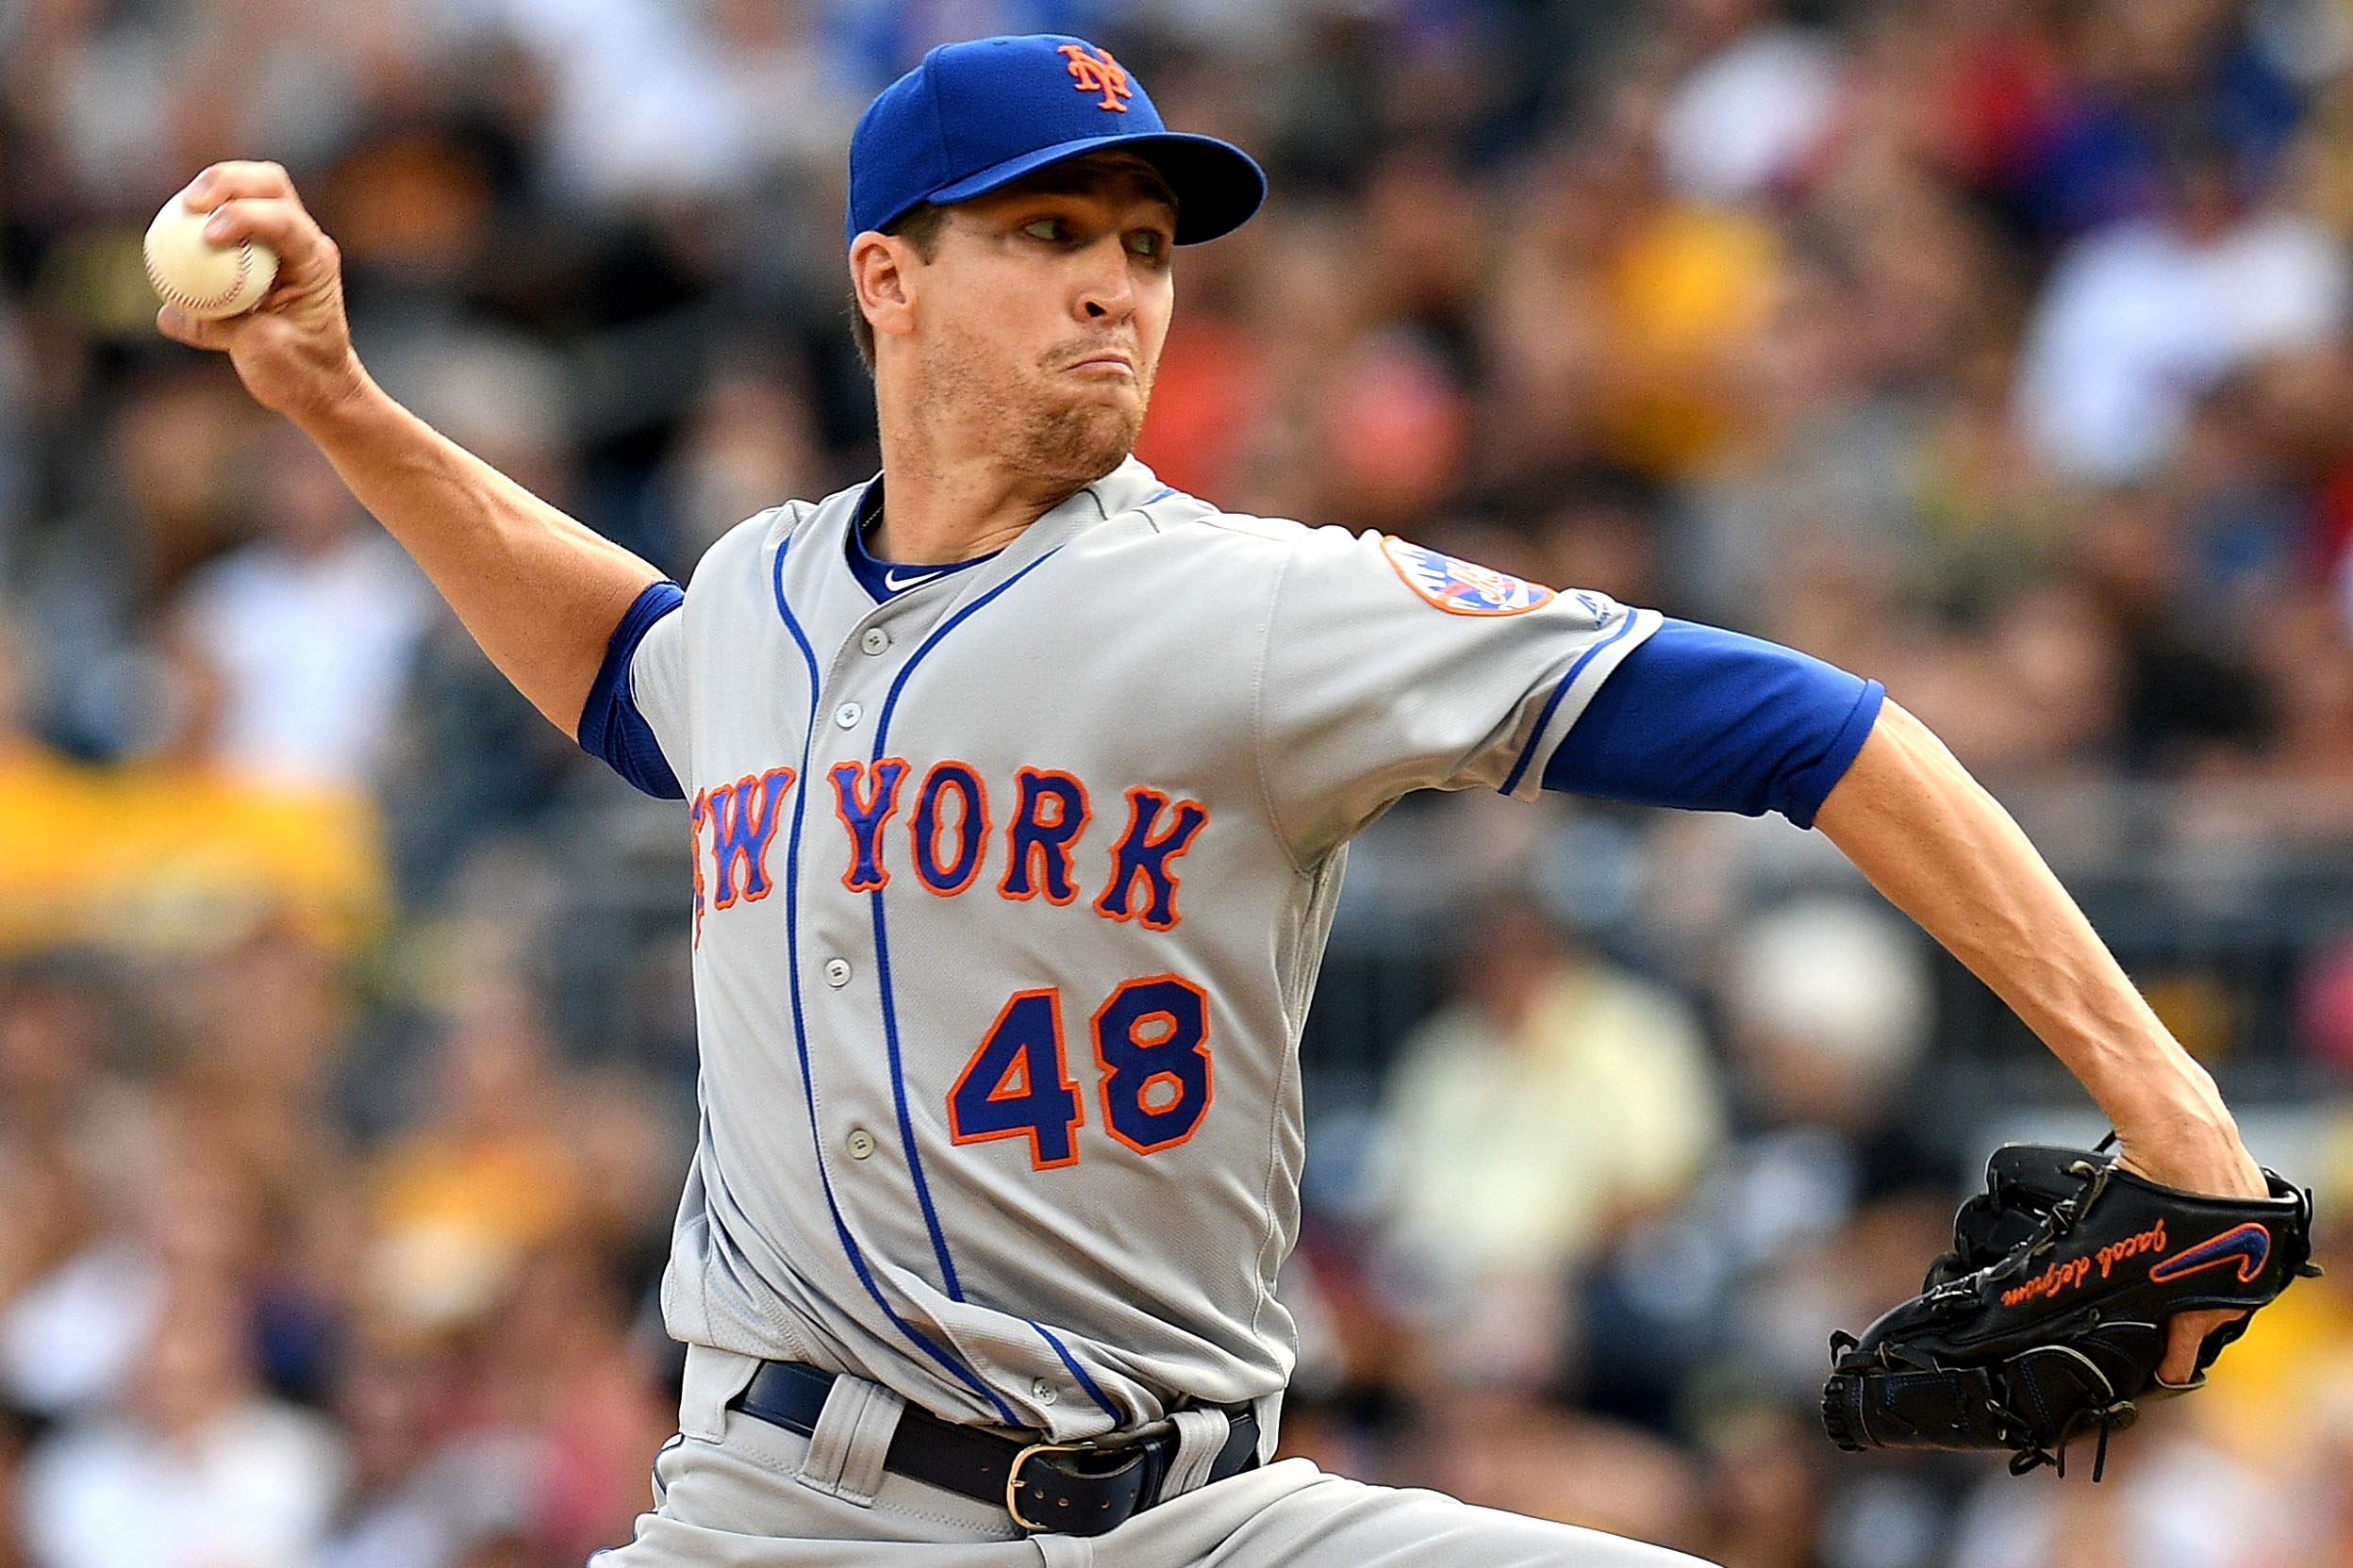 New York Mets move Jacob deGrom back 1 day for extra rest - The